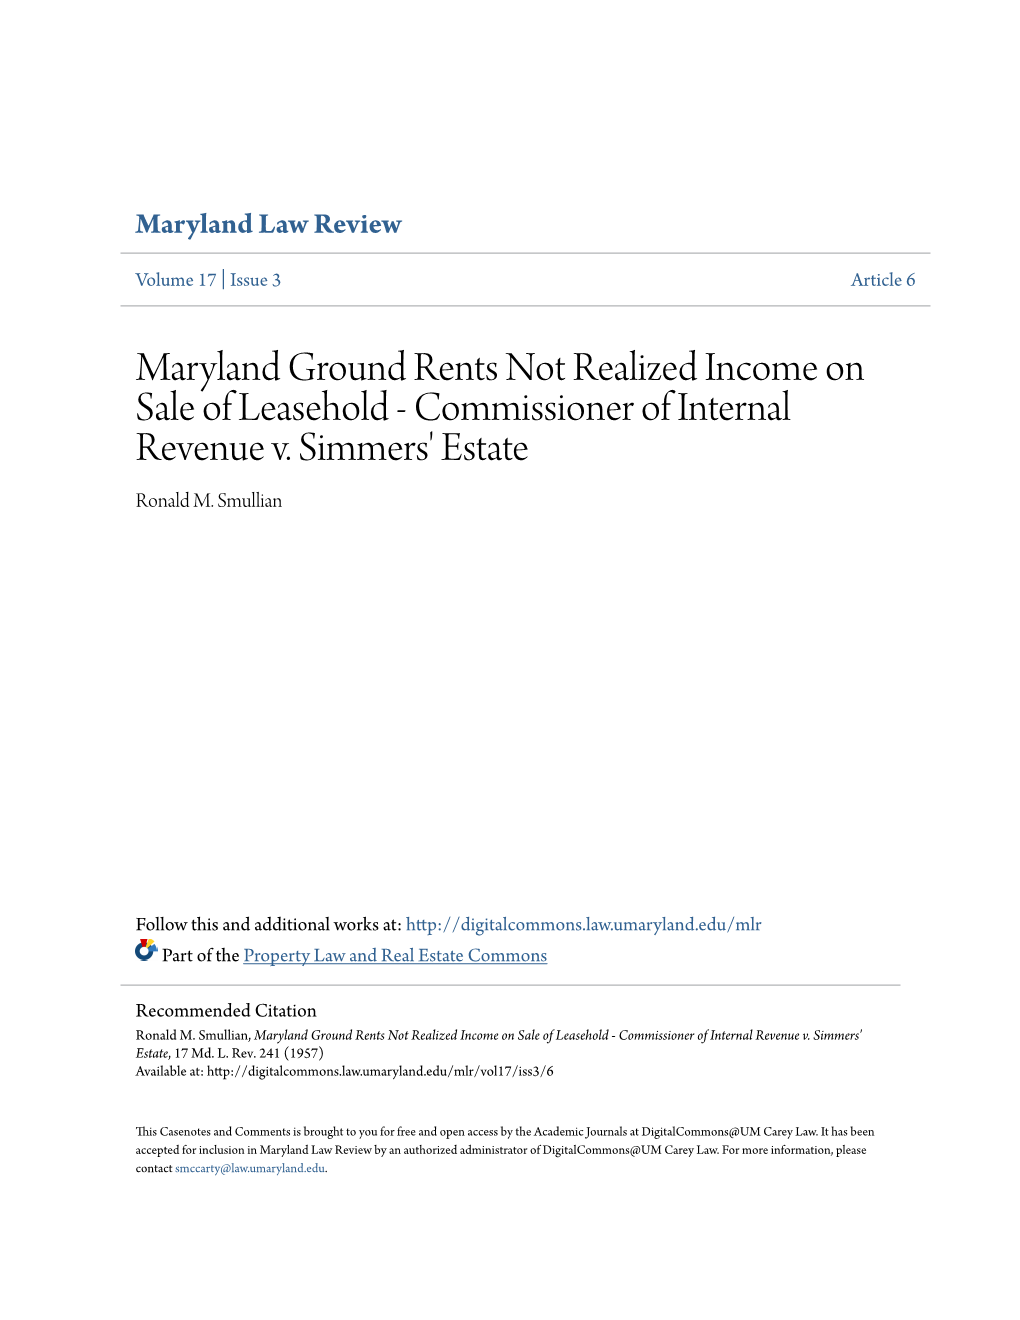 Maryland Ground Rents Not Realized Income on Sale of Leasehold - Commissioner of Internal Revenue V